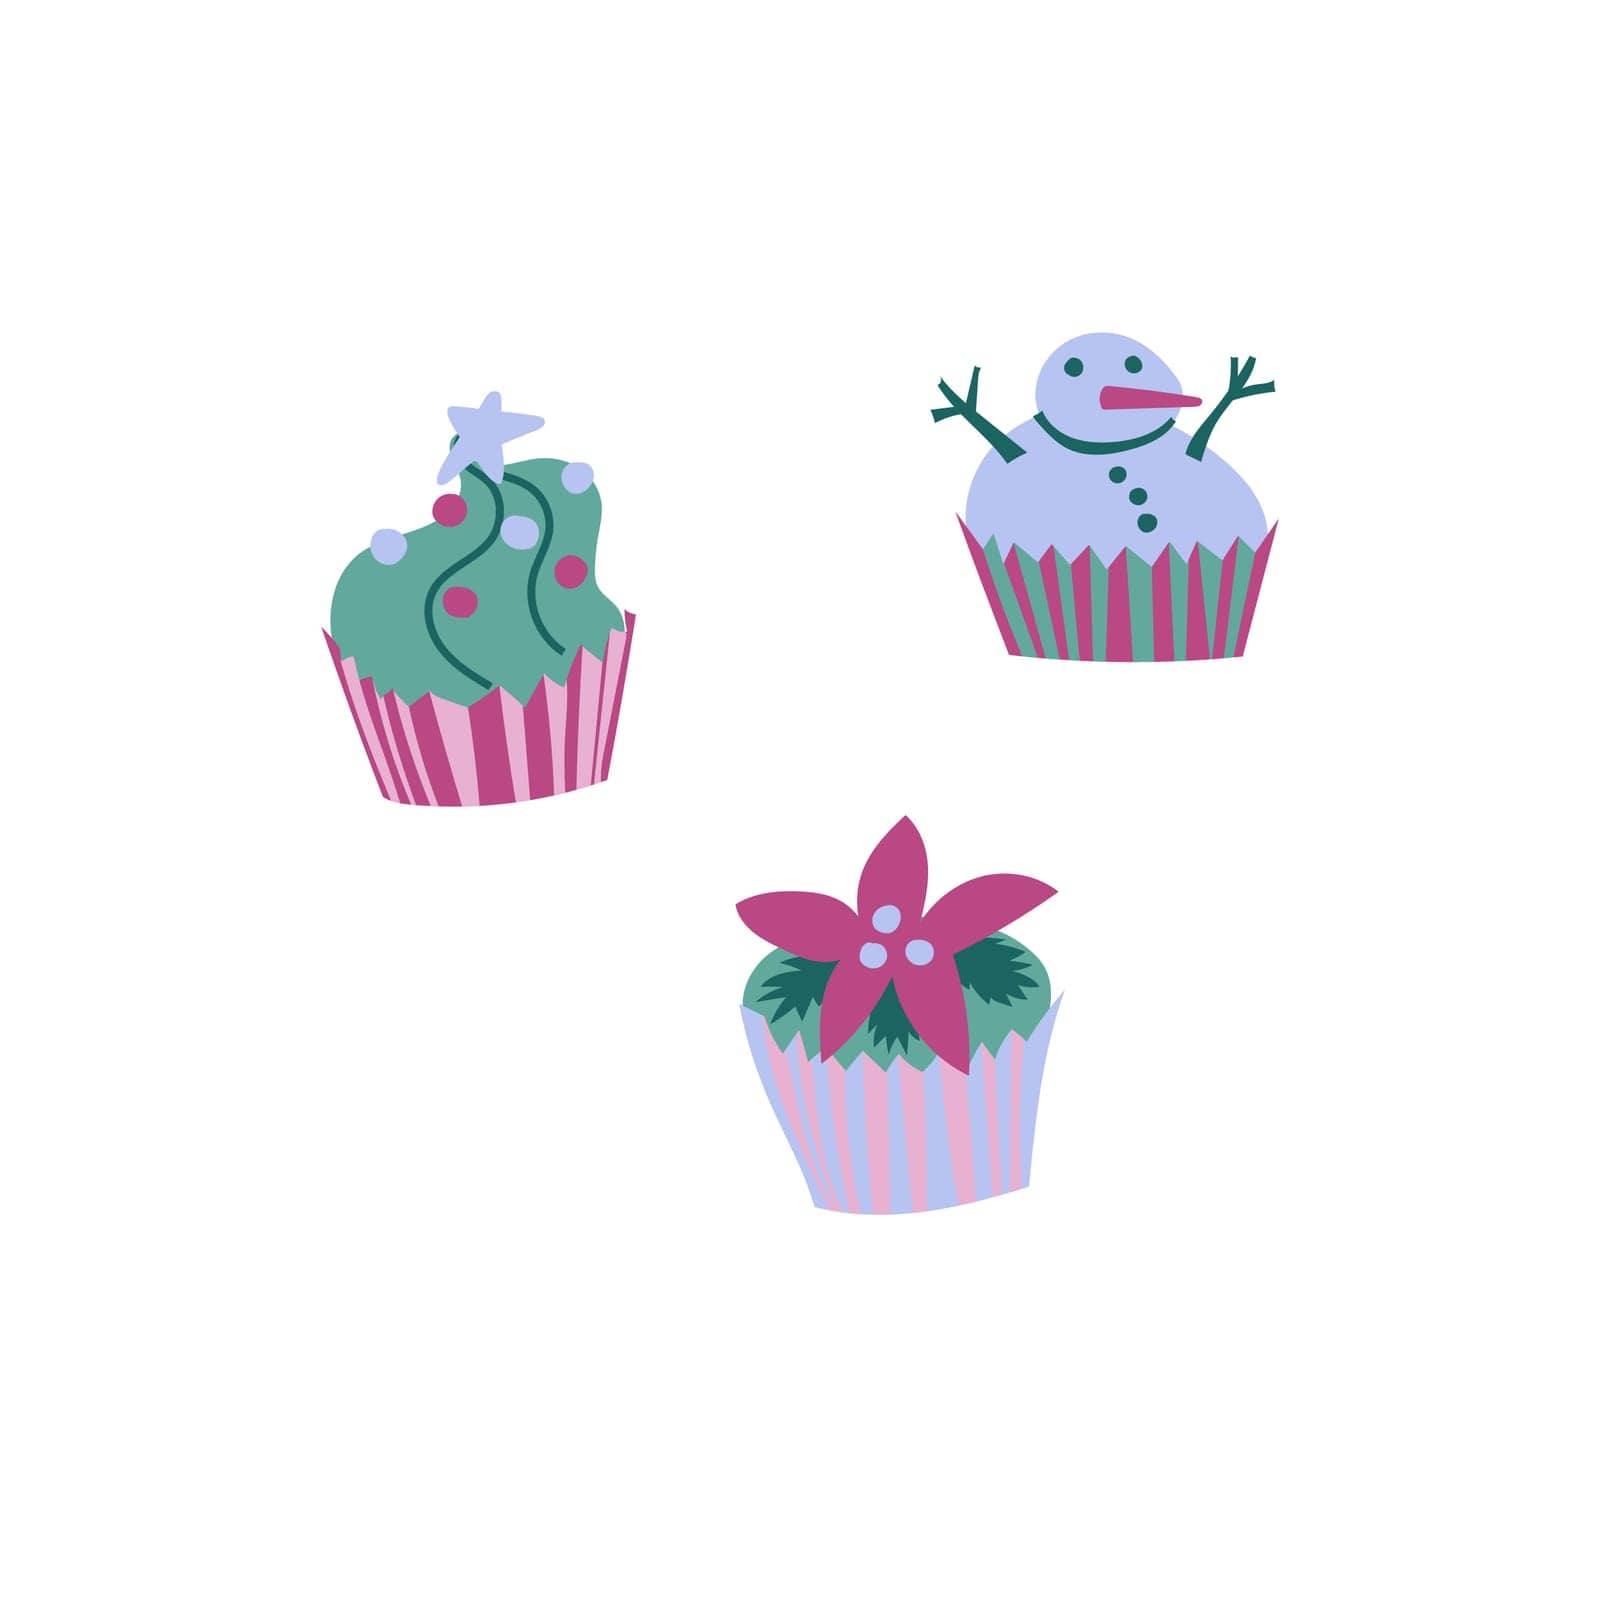 Set of 3 Christmas-themed cupcakes. Xmas tree, snowman, and poinsettia shapes. Isolated on a white background. Colorful hand-drawn vector illustration.